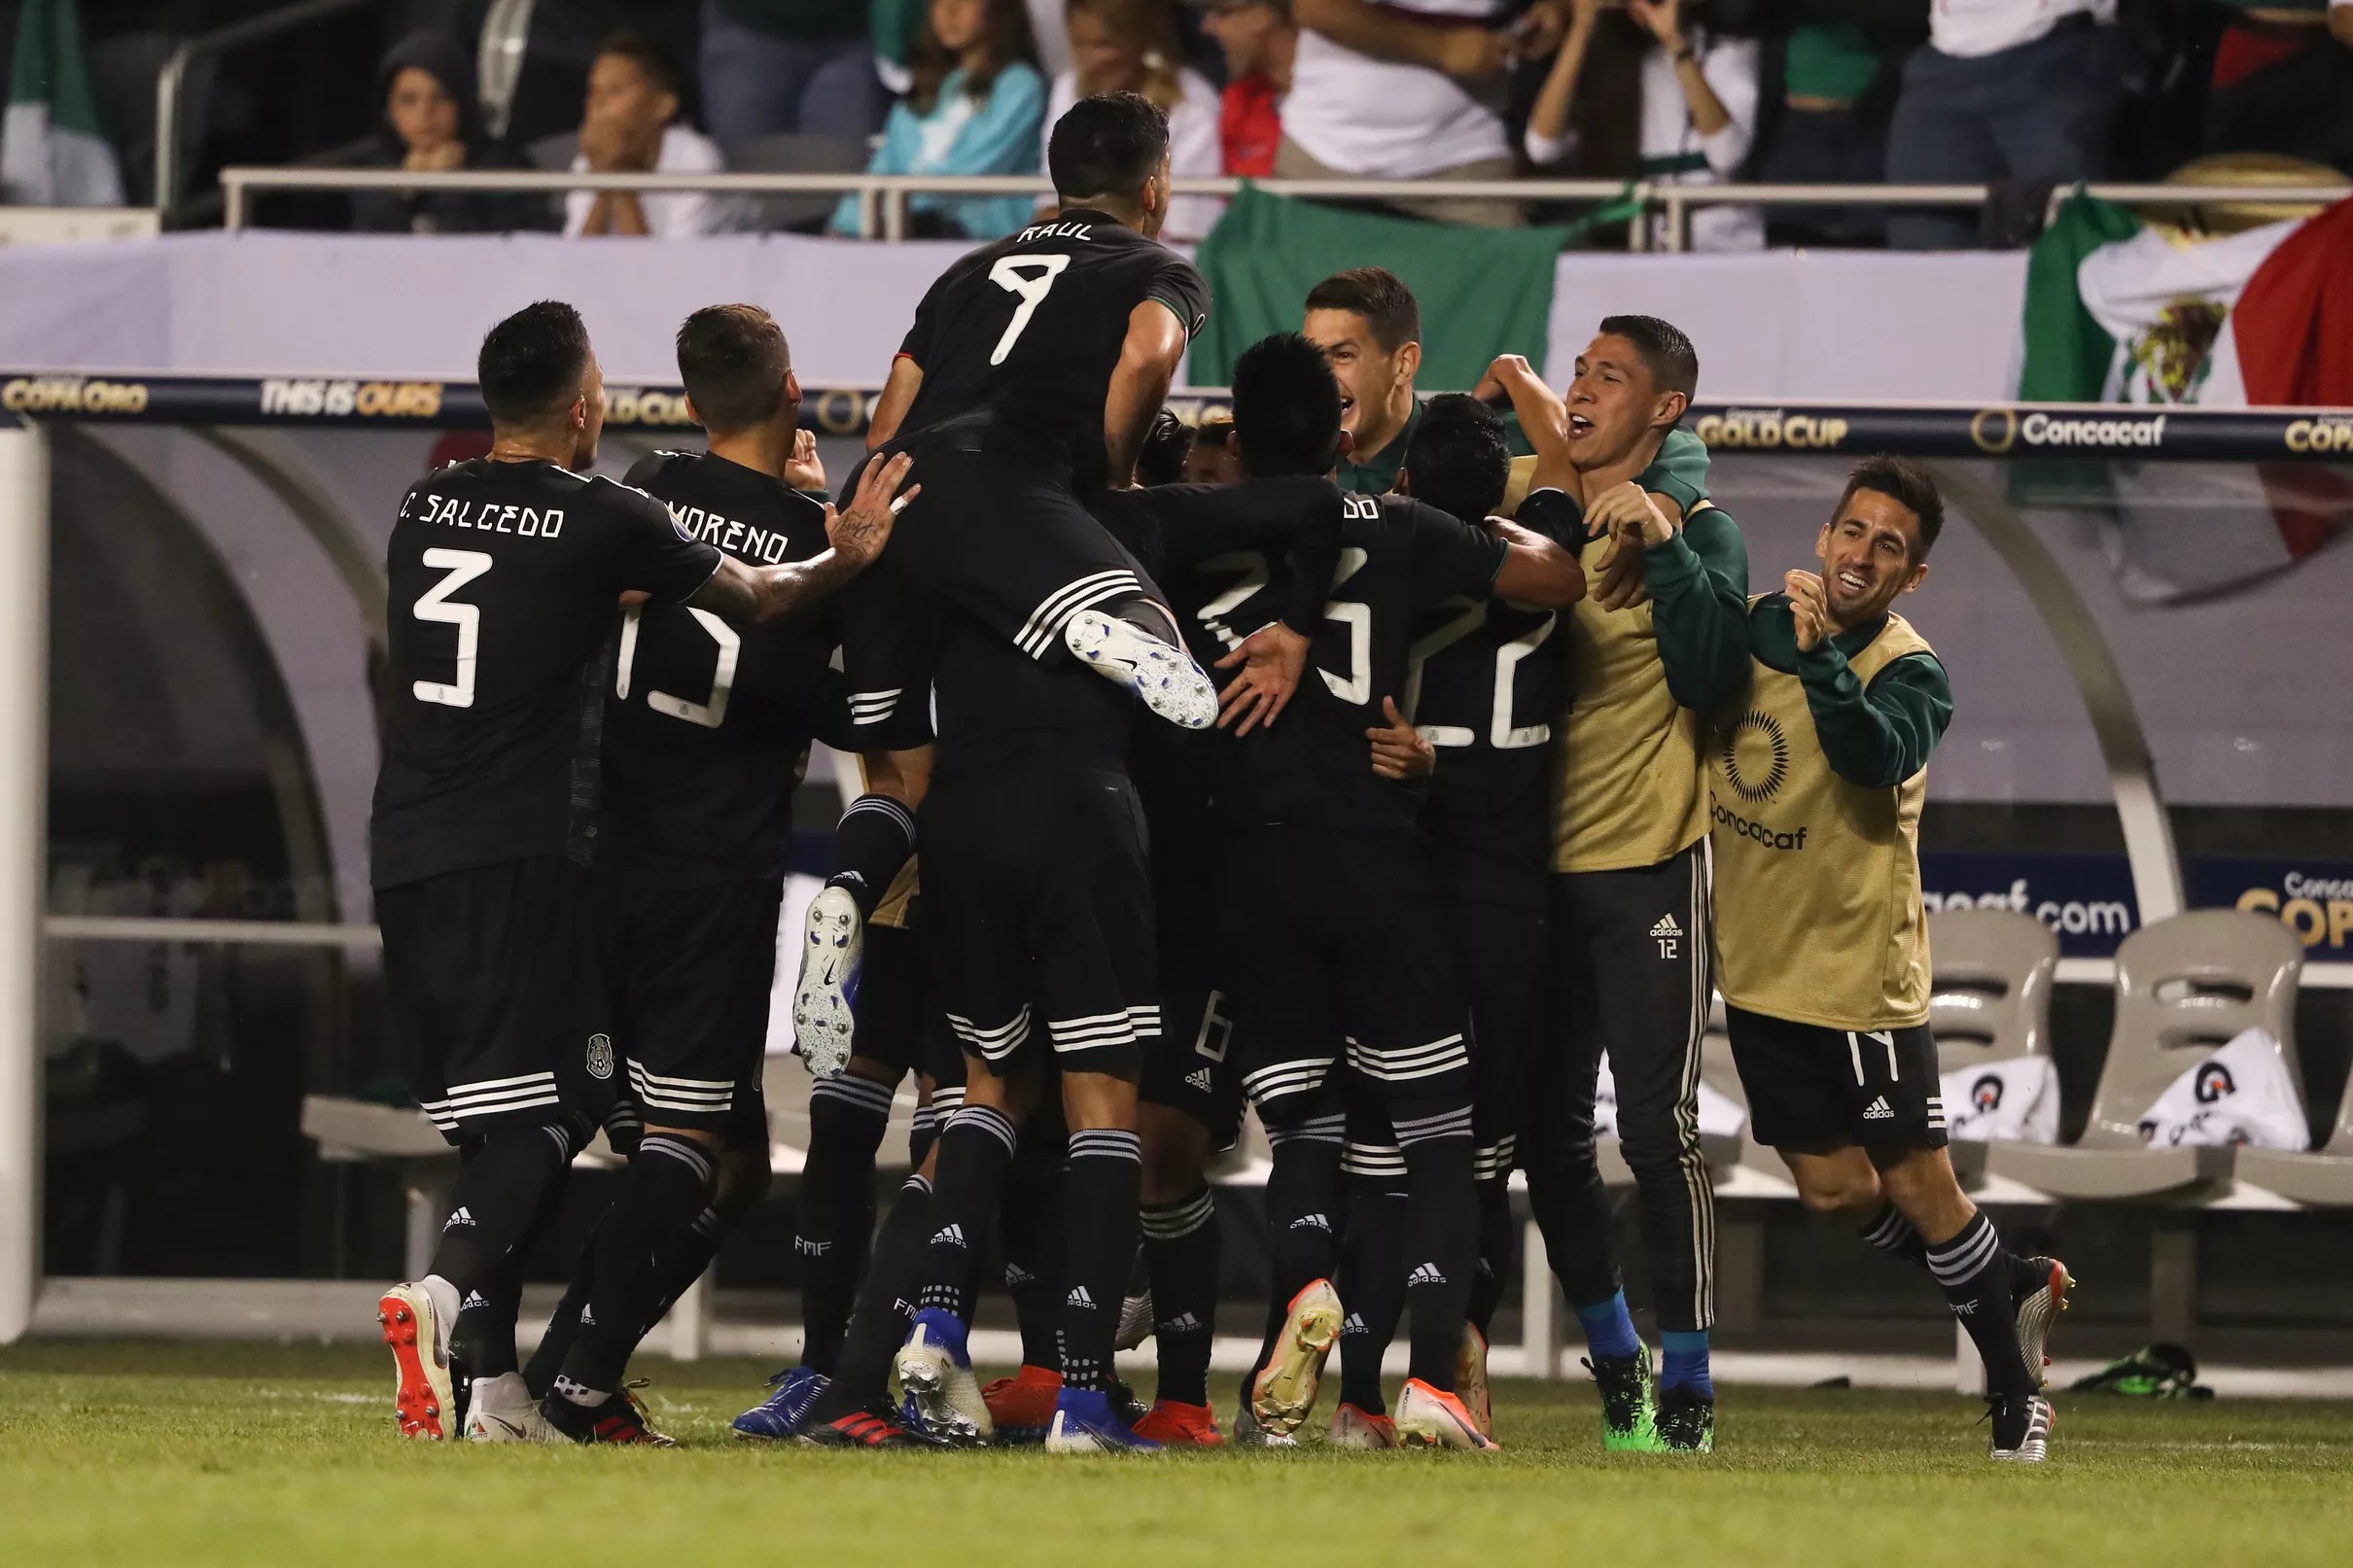 USA vs. Mexico, Gold Cup 2019 Community player ratings